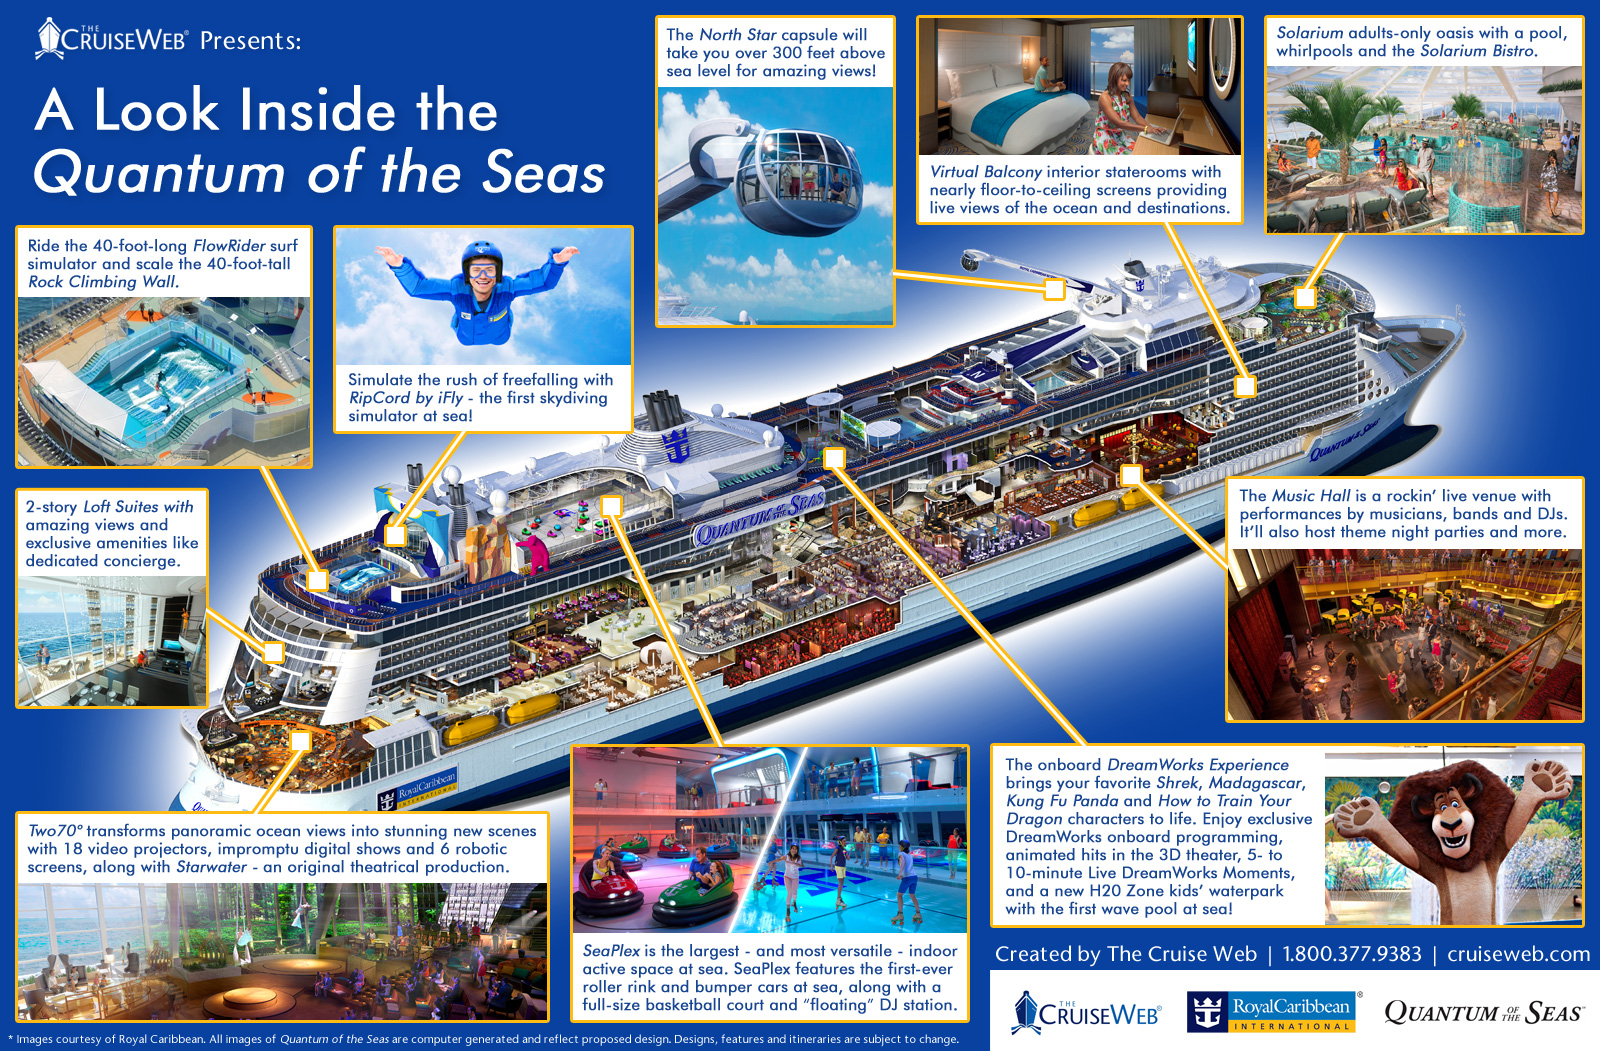 Royal Caribbean S Quantum Of The Seas Cruise Ship 2019 And